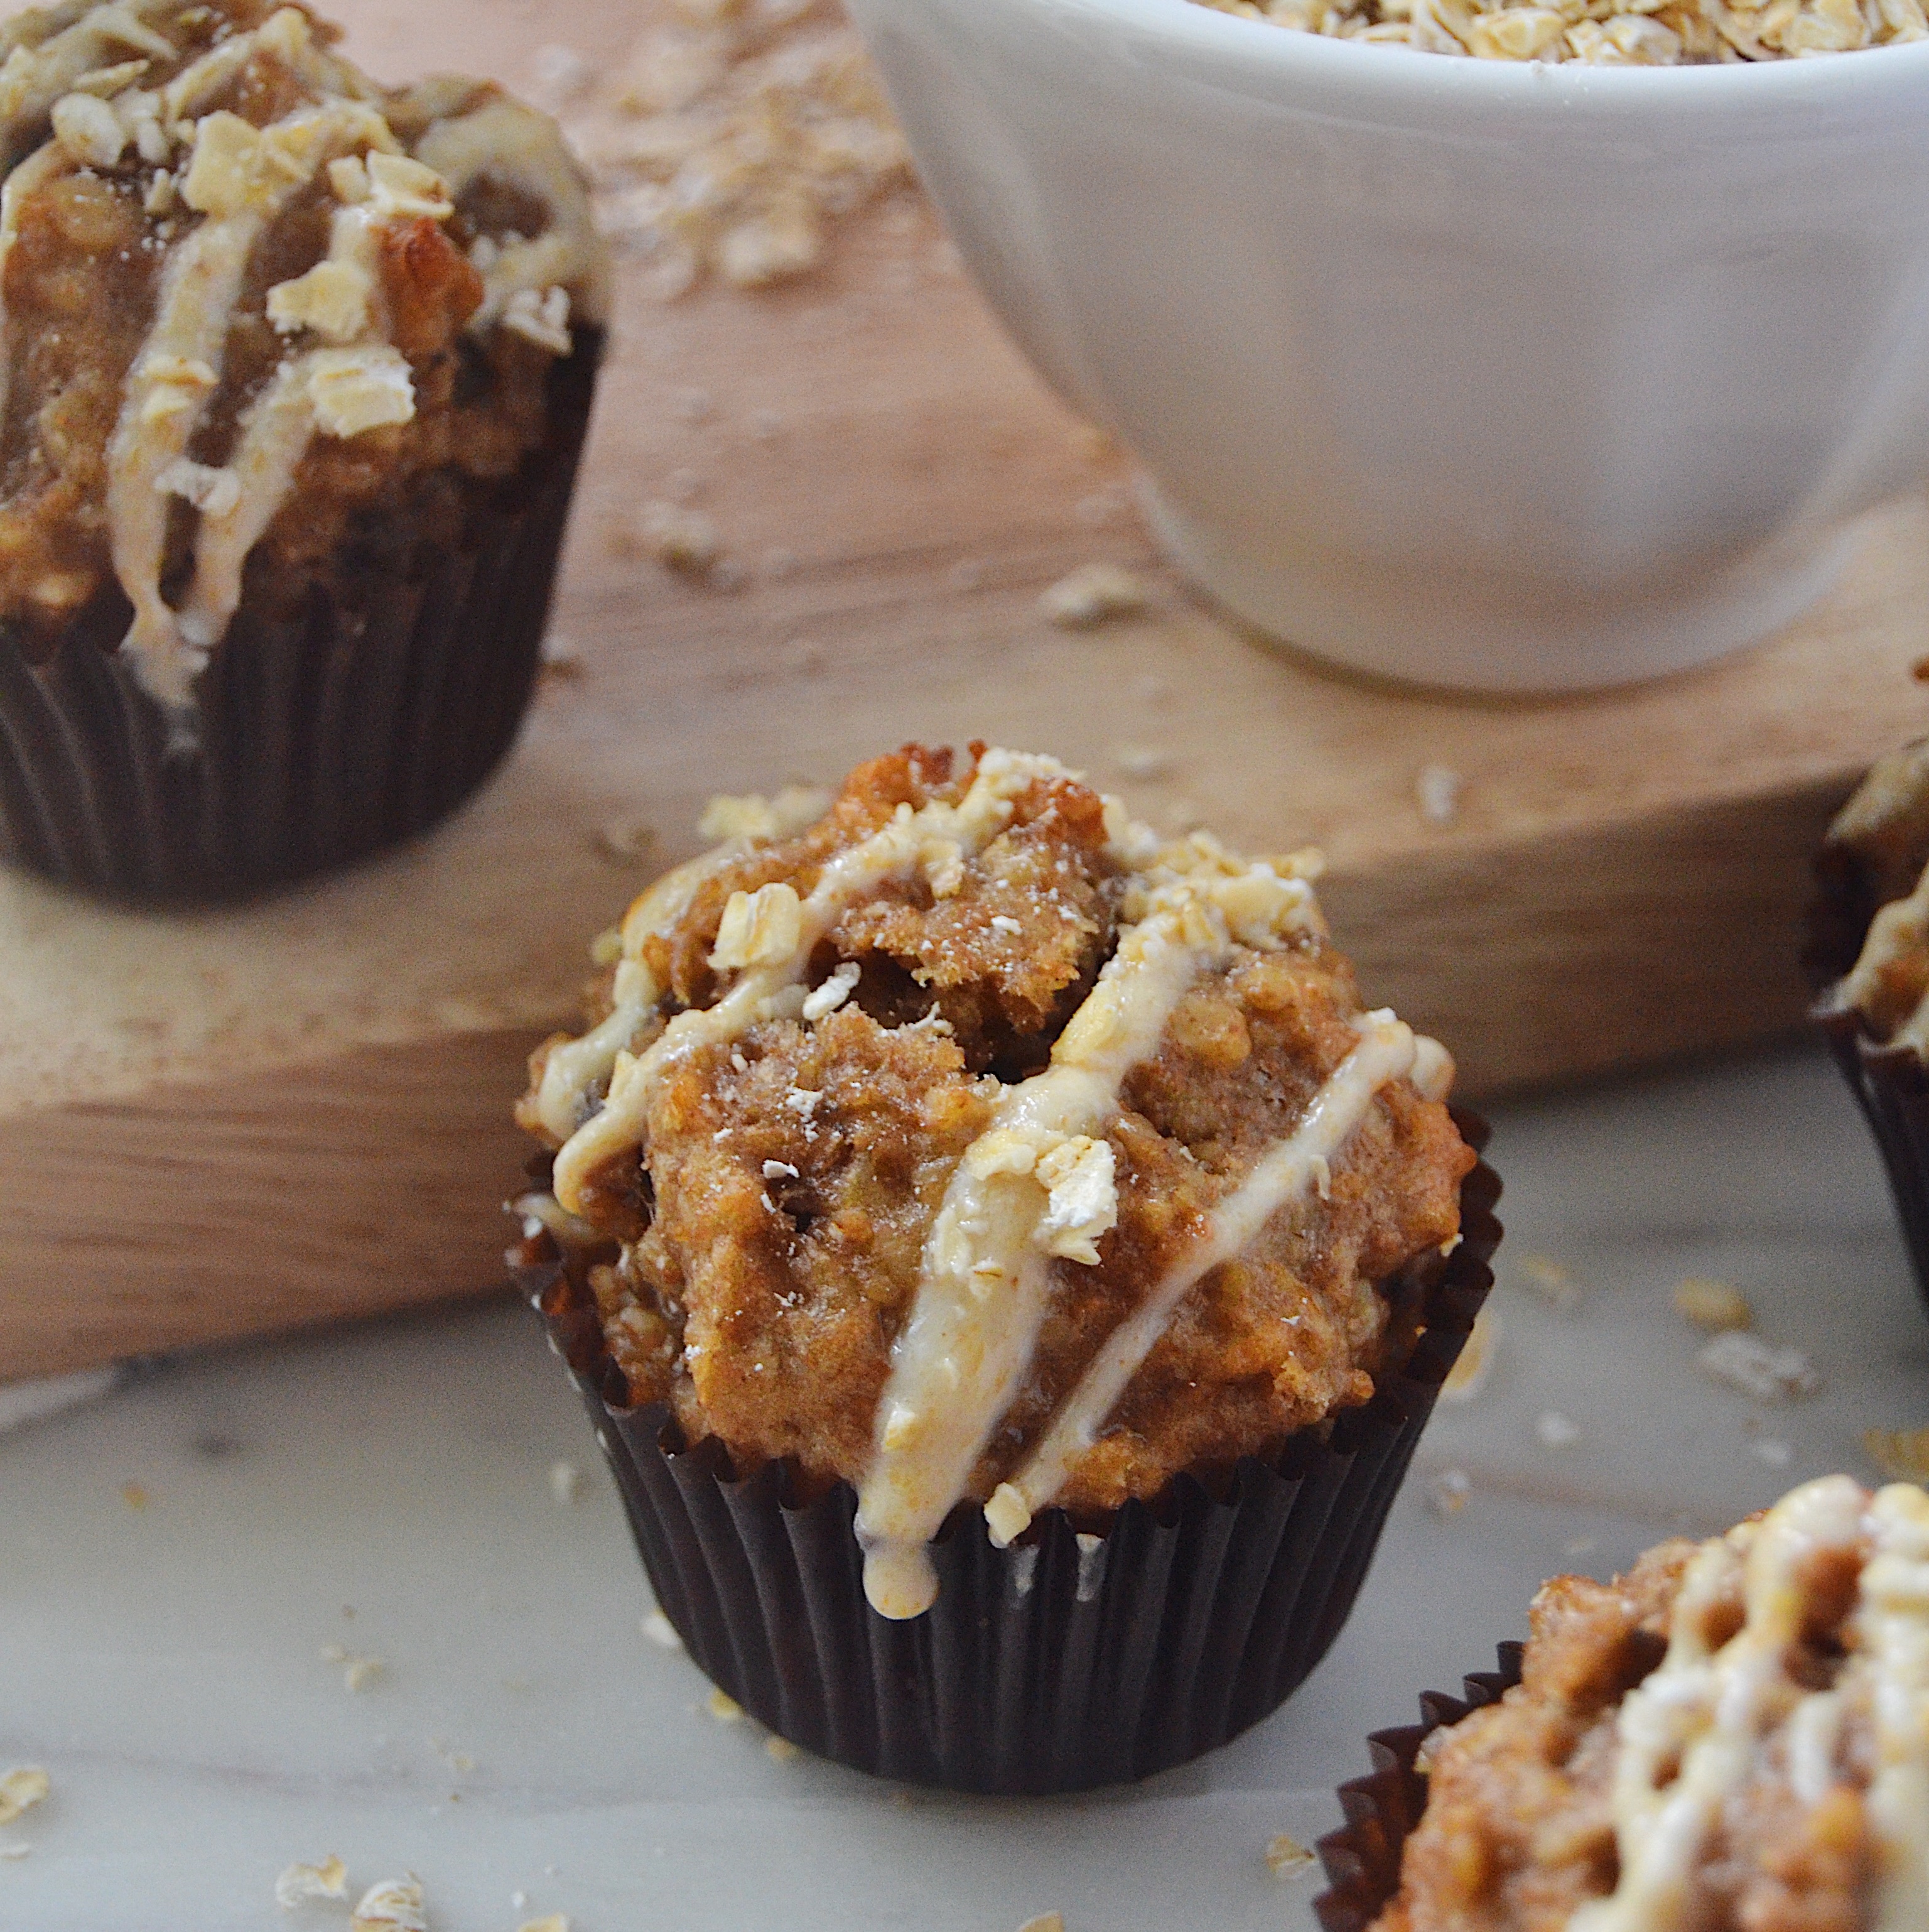 Banana Oatmeal Peanut Butter Muffin Pupcake recipe for the dog you love to spoil